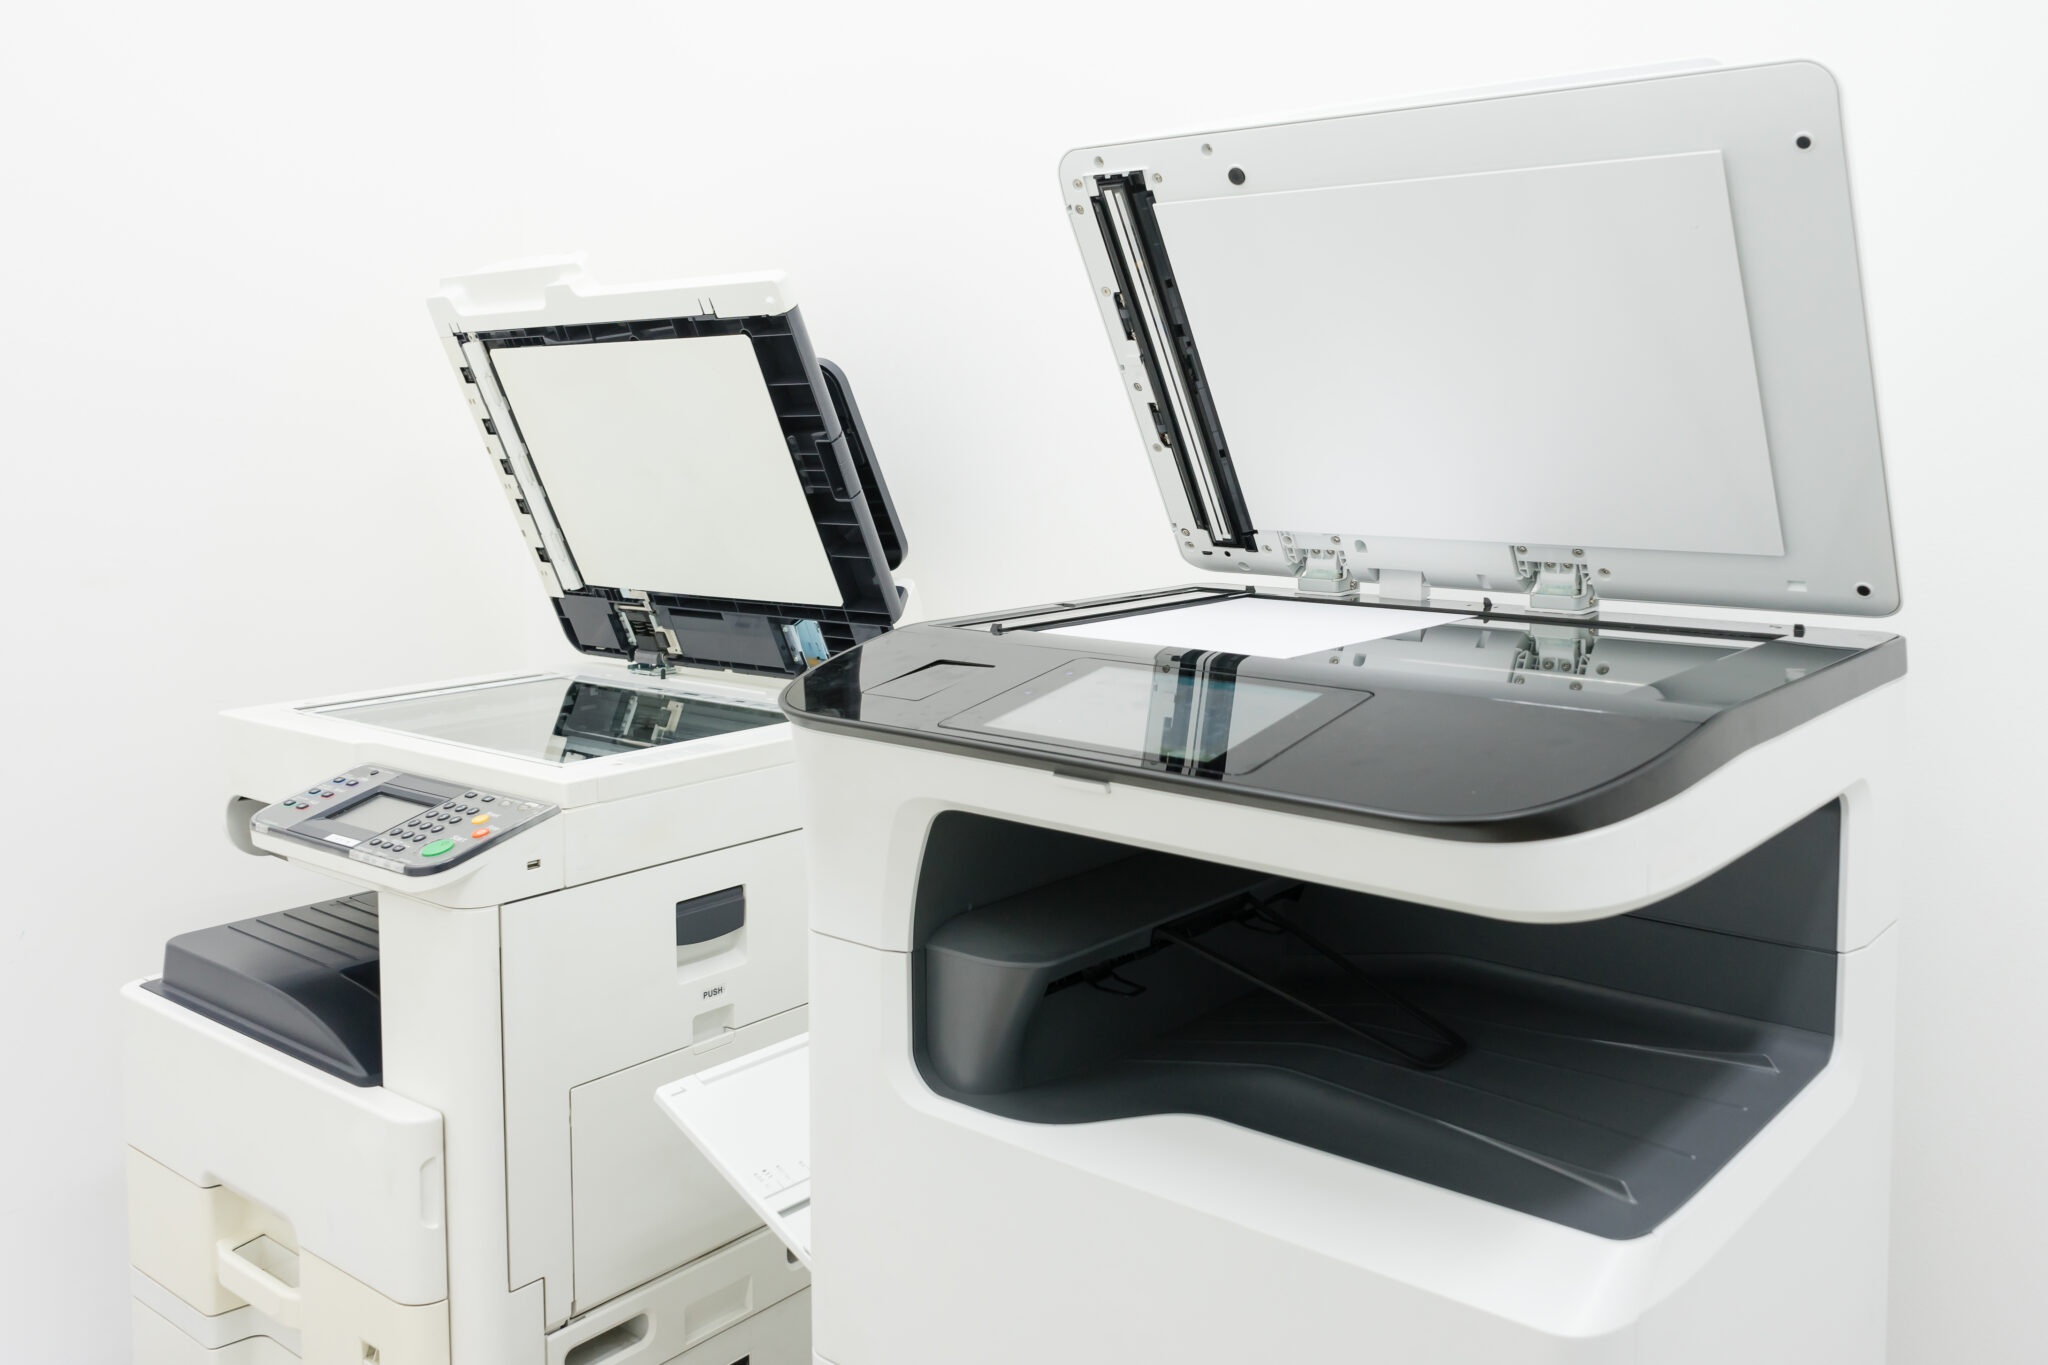 vecteezy photocopier is a machine that makes paper copies of documents and other visual images close Stampanti